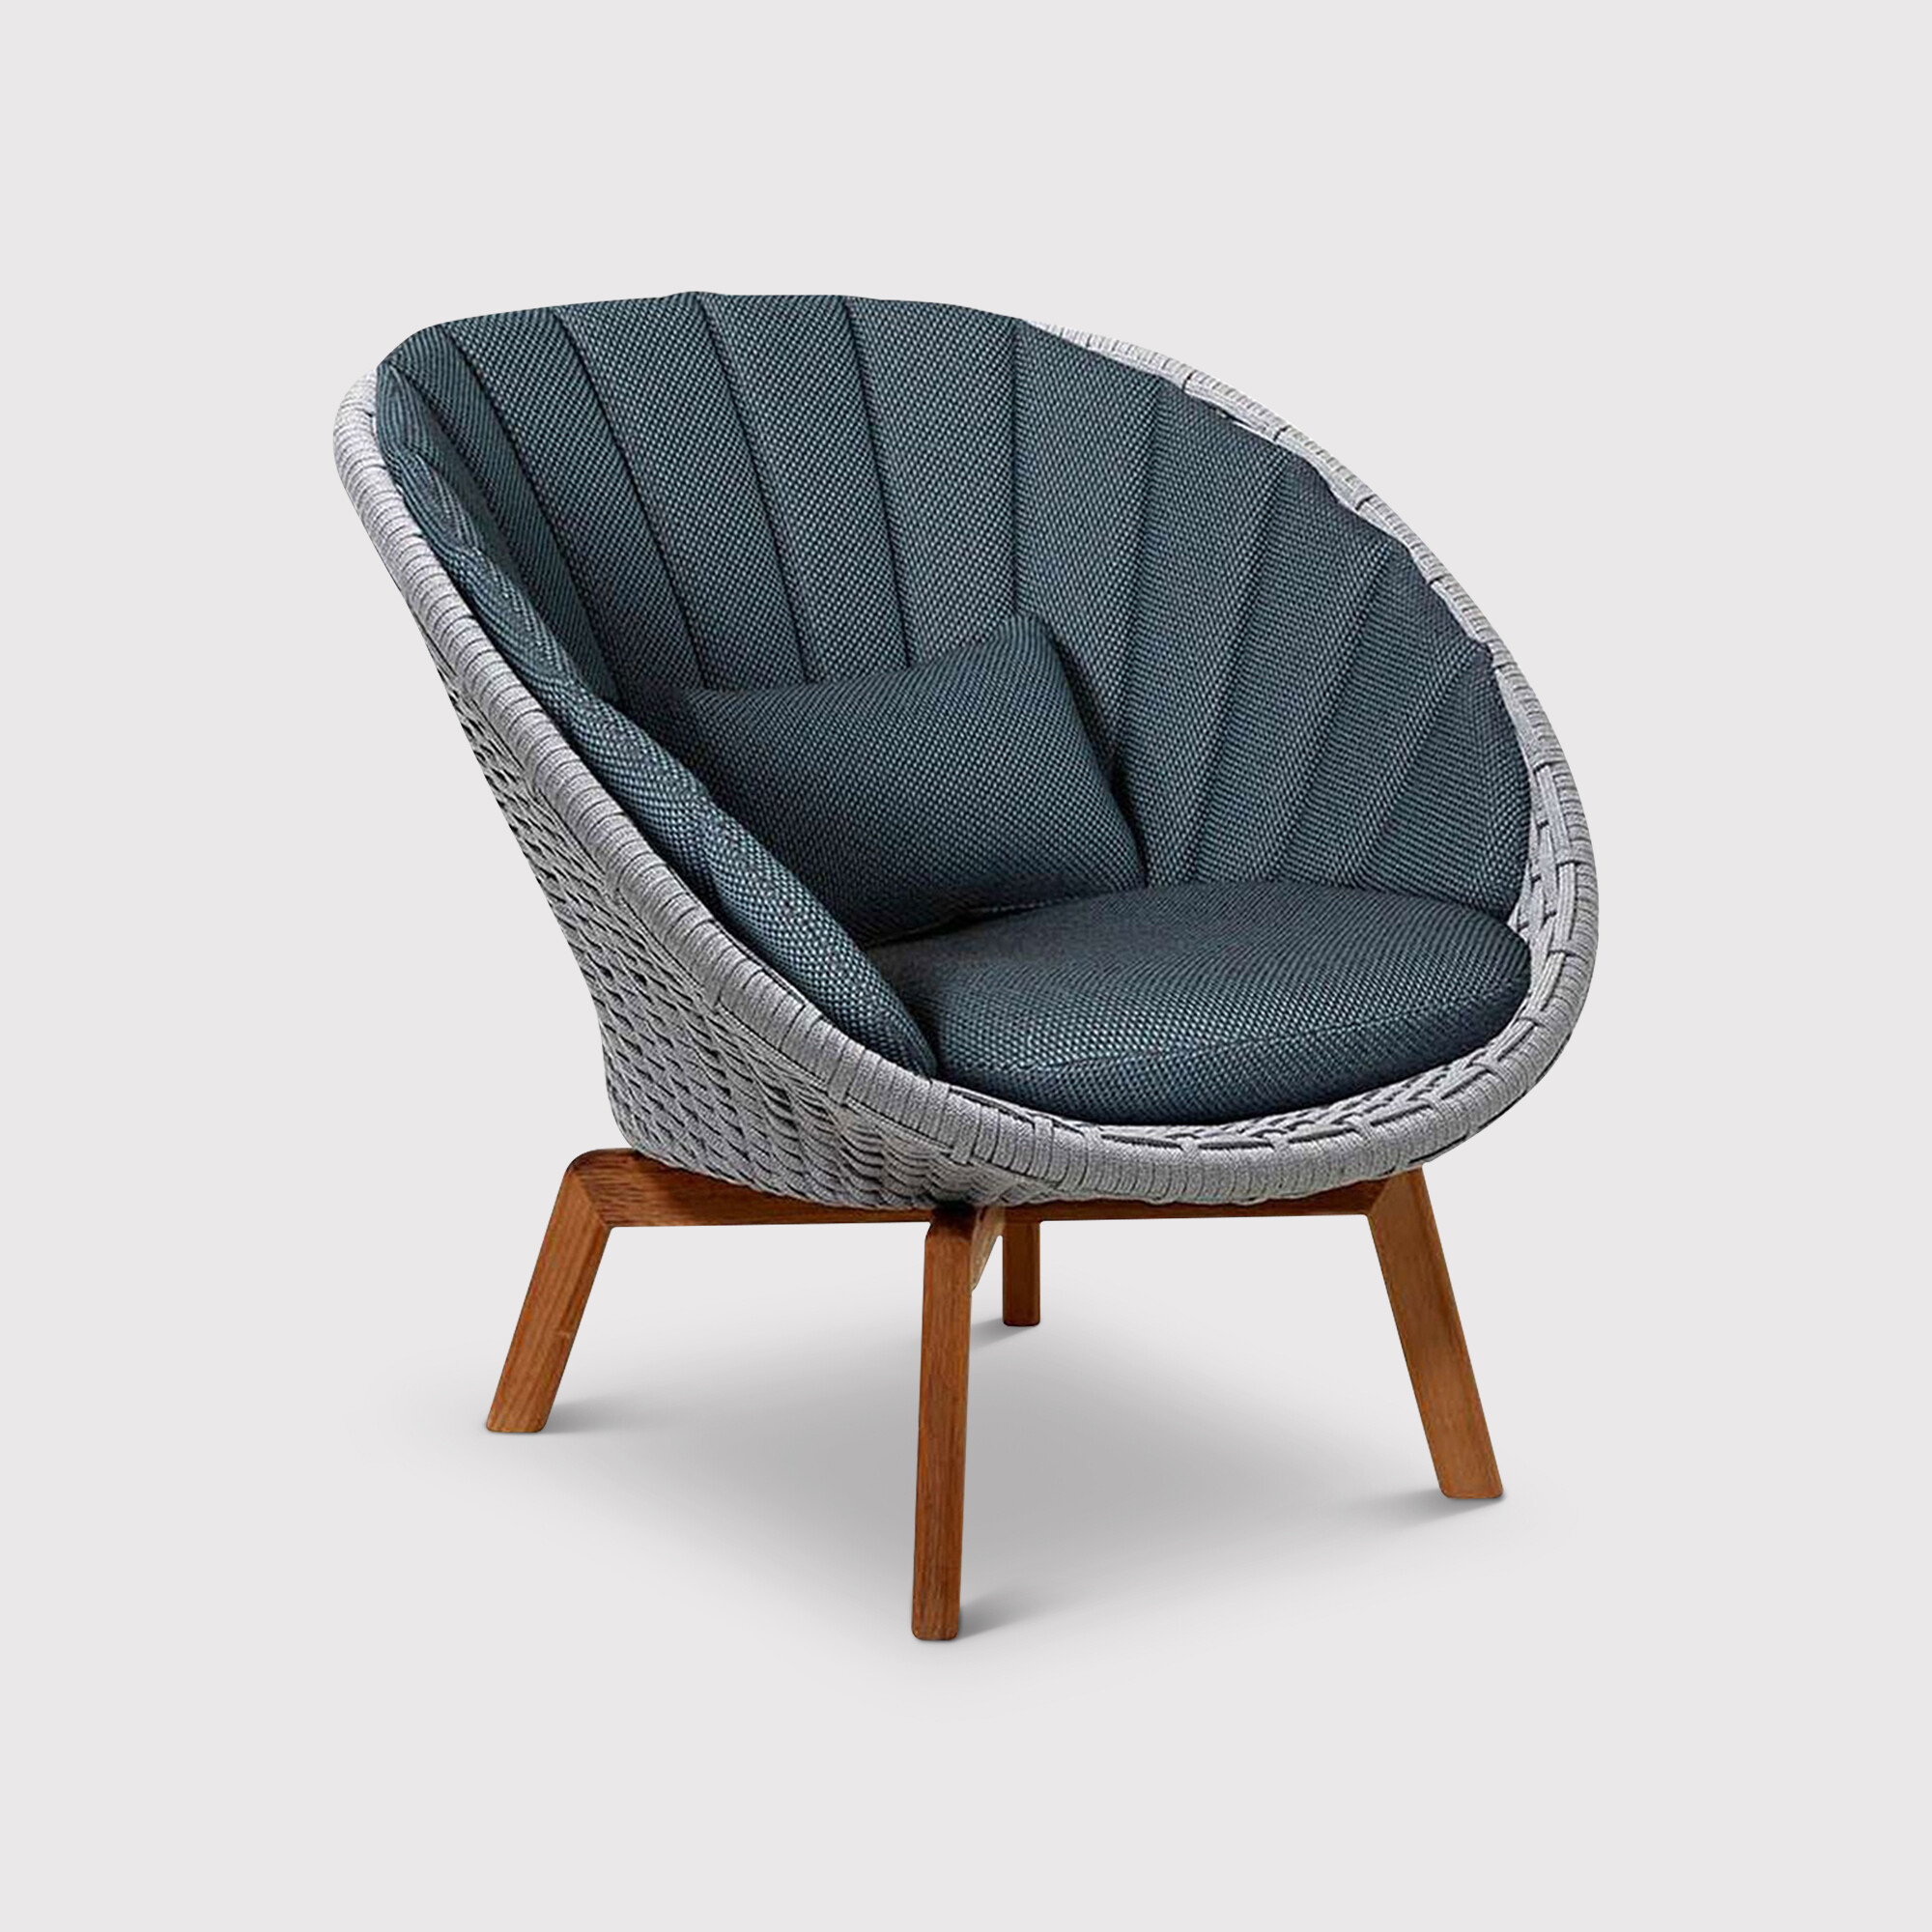 Cane Line Peacock Lounge Chair With Cushion Set, Grey Wood | Barker & Stonehouse